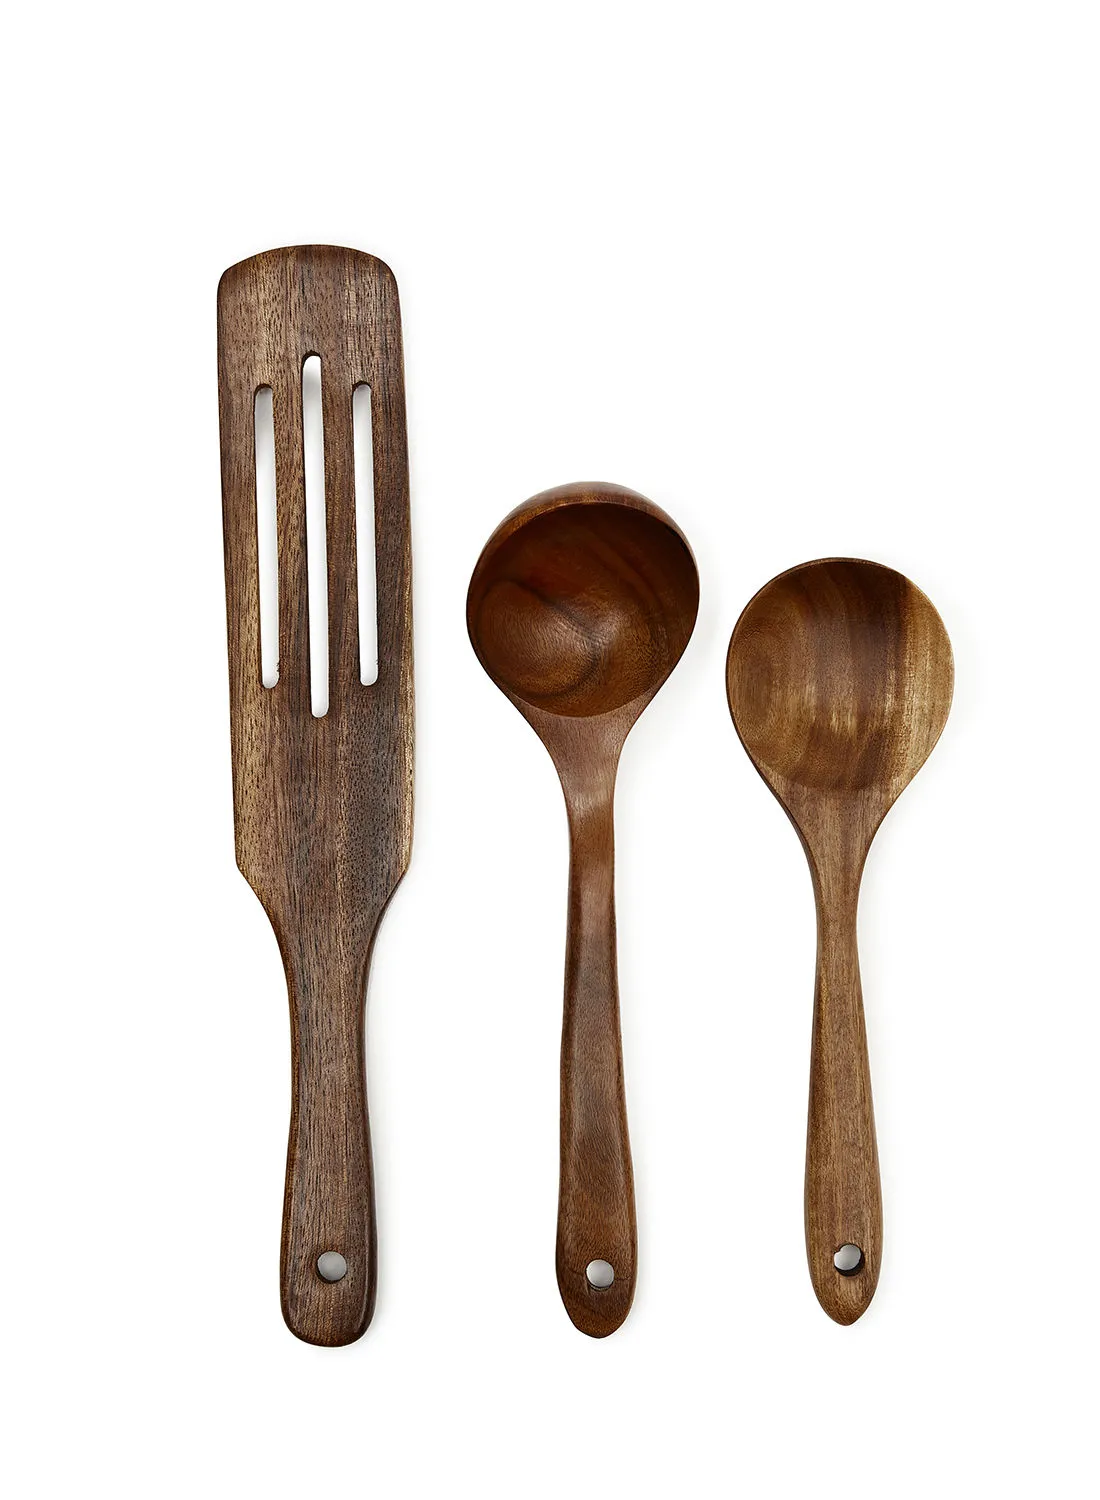 noon east 3 Piece Kitchen Accessories - Made Of Acacia Wood - Premium Quality - Utensils Set - Slotted Spatula, Soup Ladle, Gravy Spoon - Dark Brown